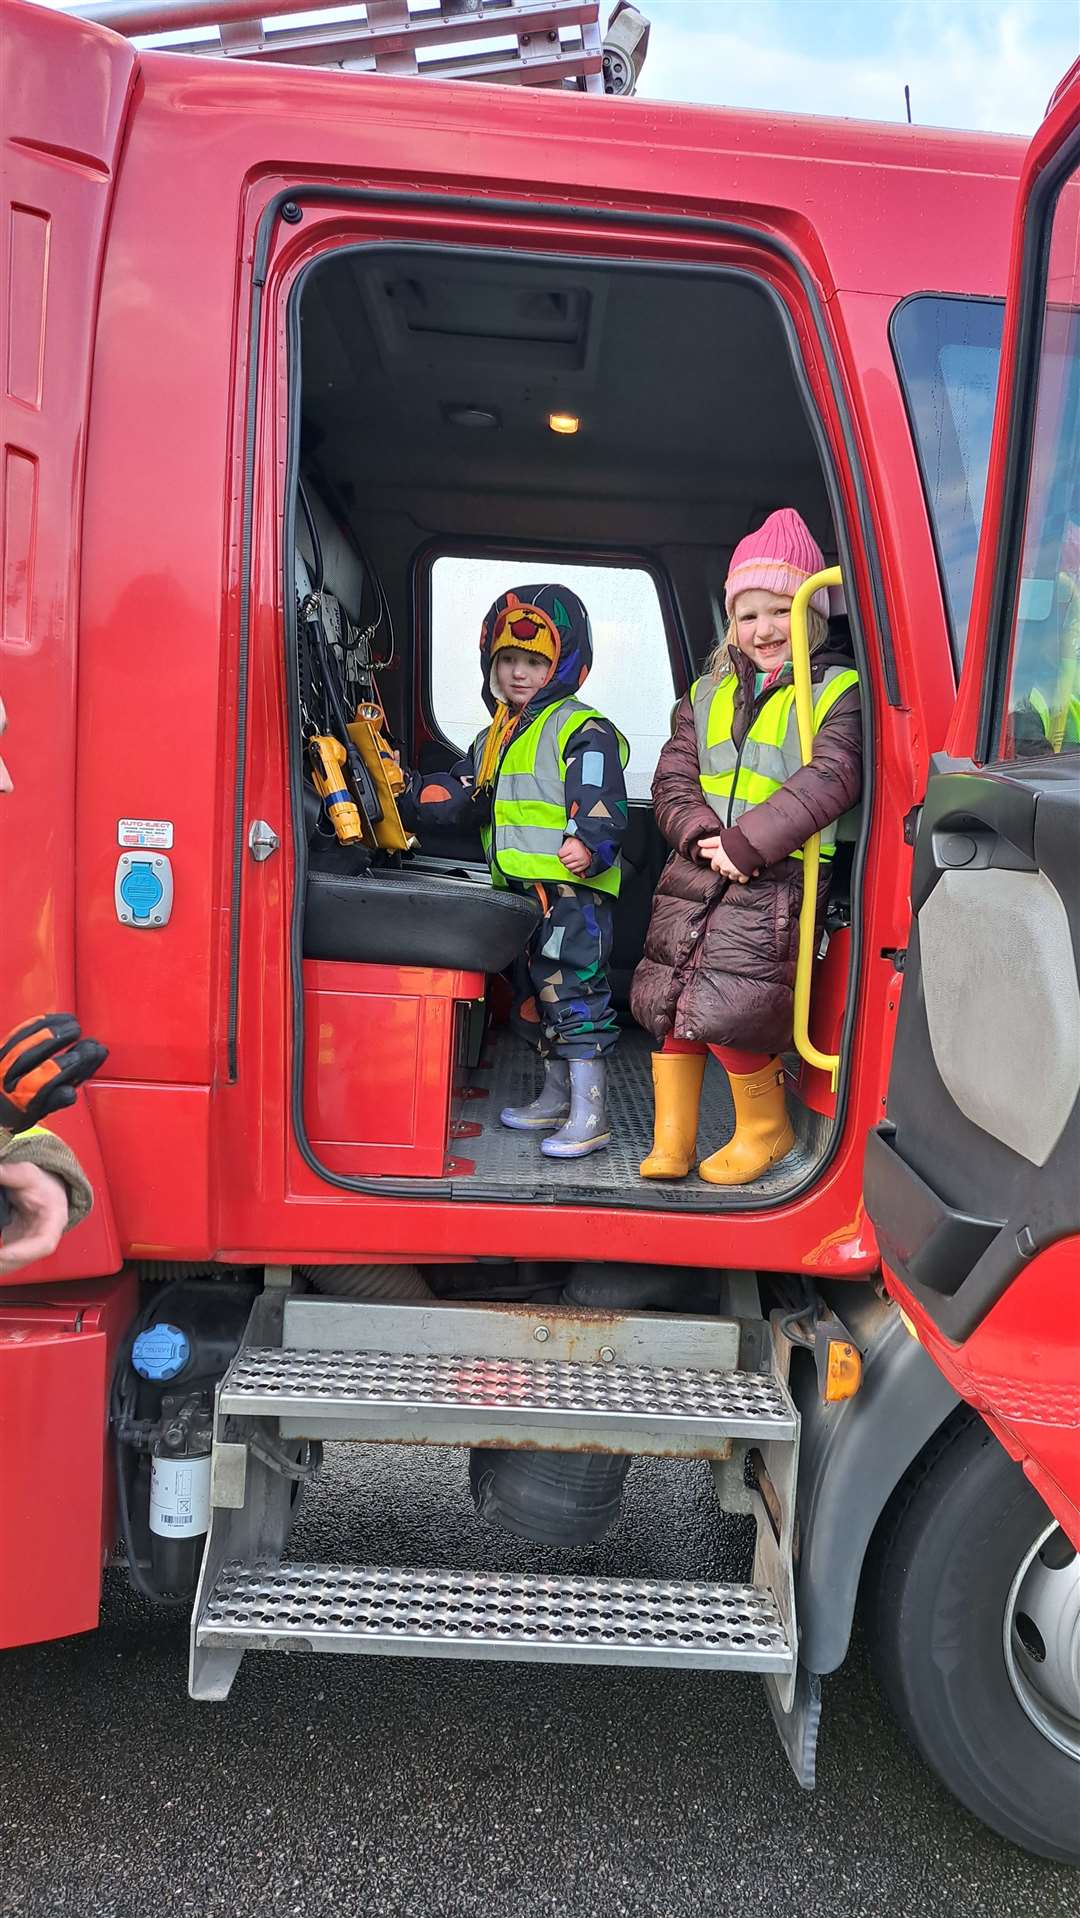 Lena Mackay, whose father is one of the Tongue crew, and Nell Gunn Maclean enjoyed climbing into the cab of the fire truck.